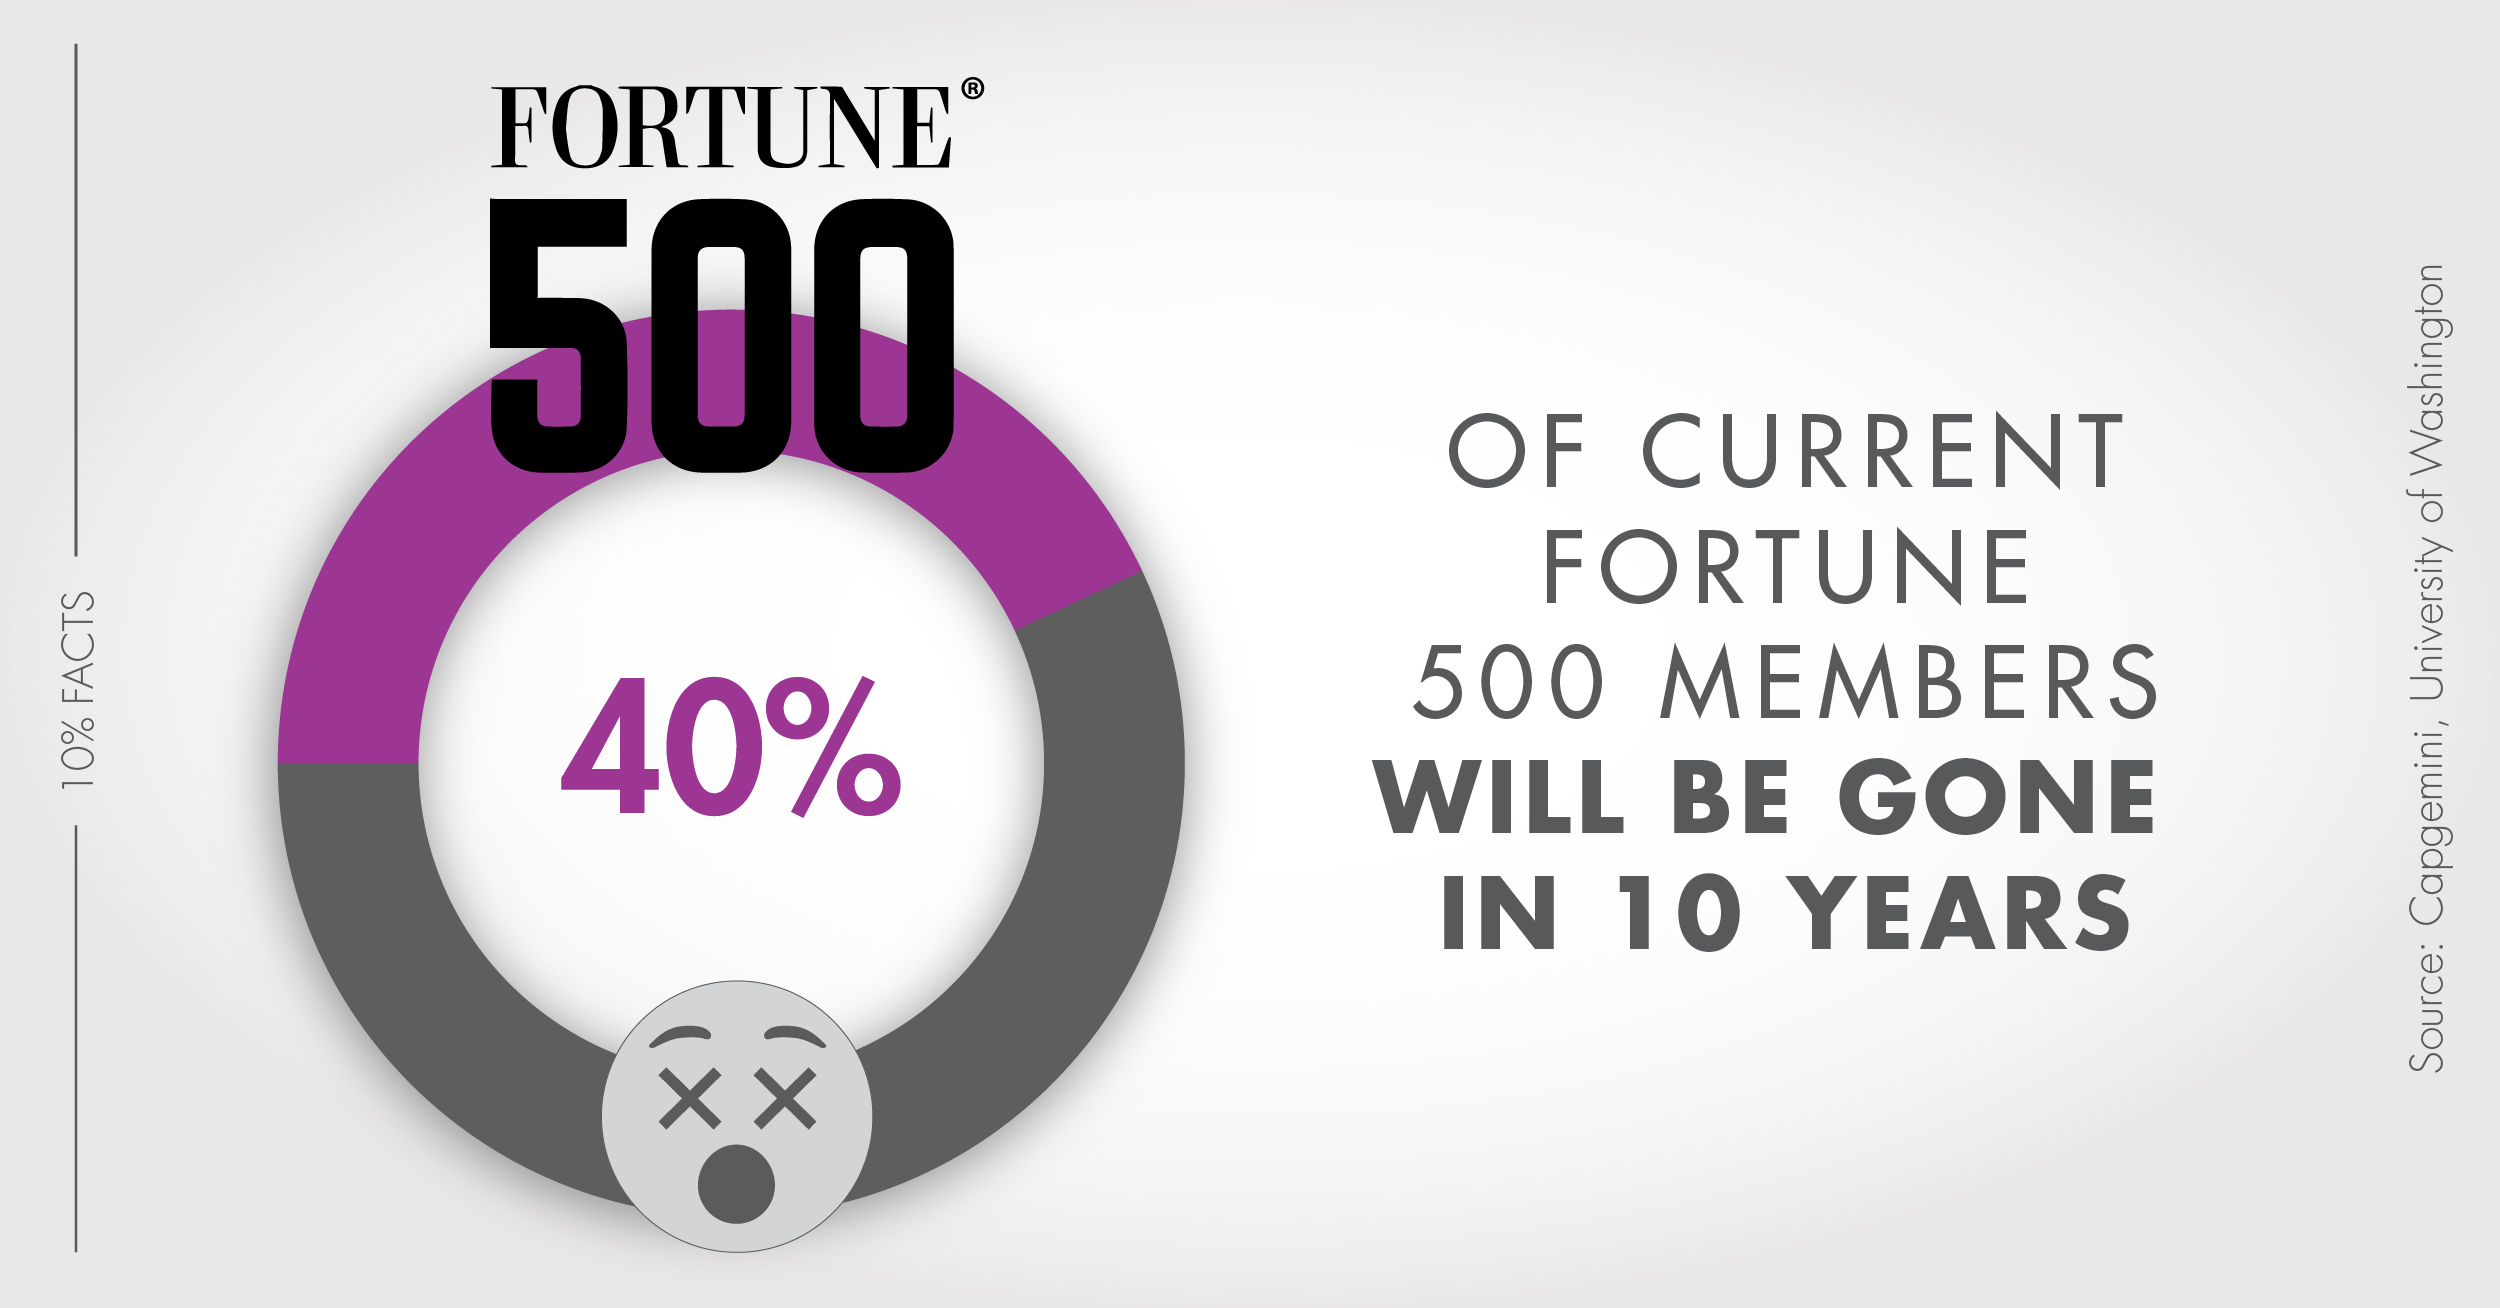 40% of current Fortune 500 members will be gone in 10 years